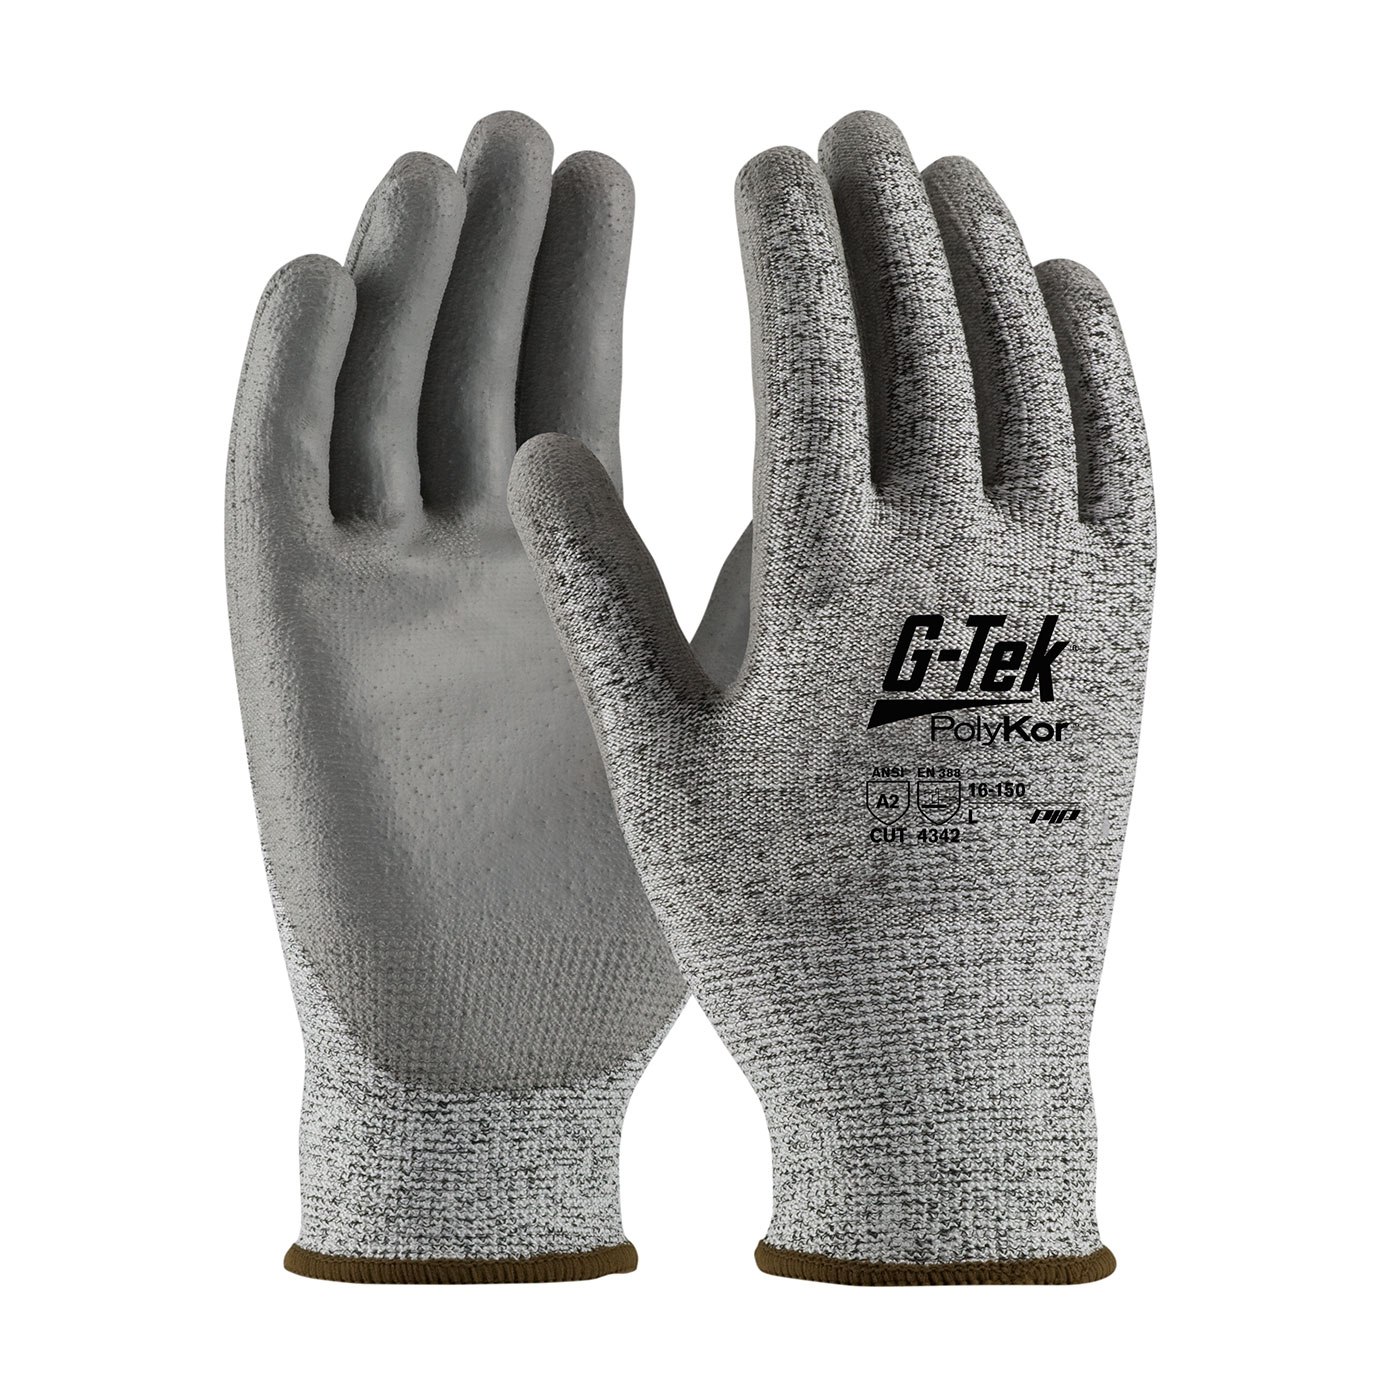 PIP 16-150/L G-Tek PolyKor Seamless Knit PolyKor Blended Glove with Polyurethane Coated Smooth Grip on Palm & Fingers - Large PID-16 150 L